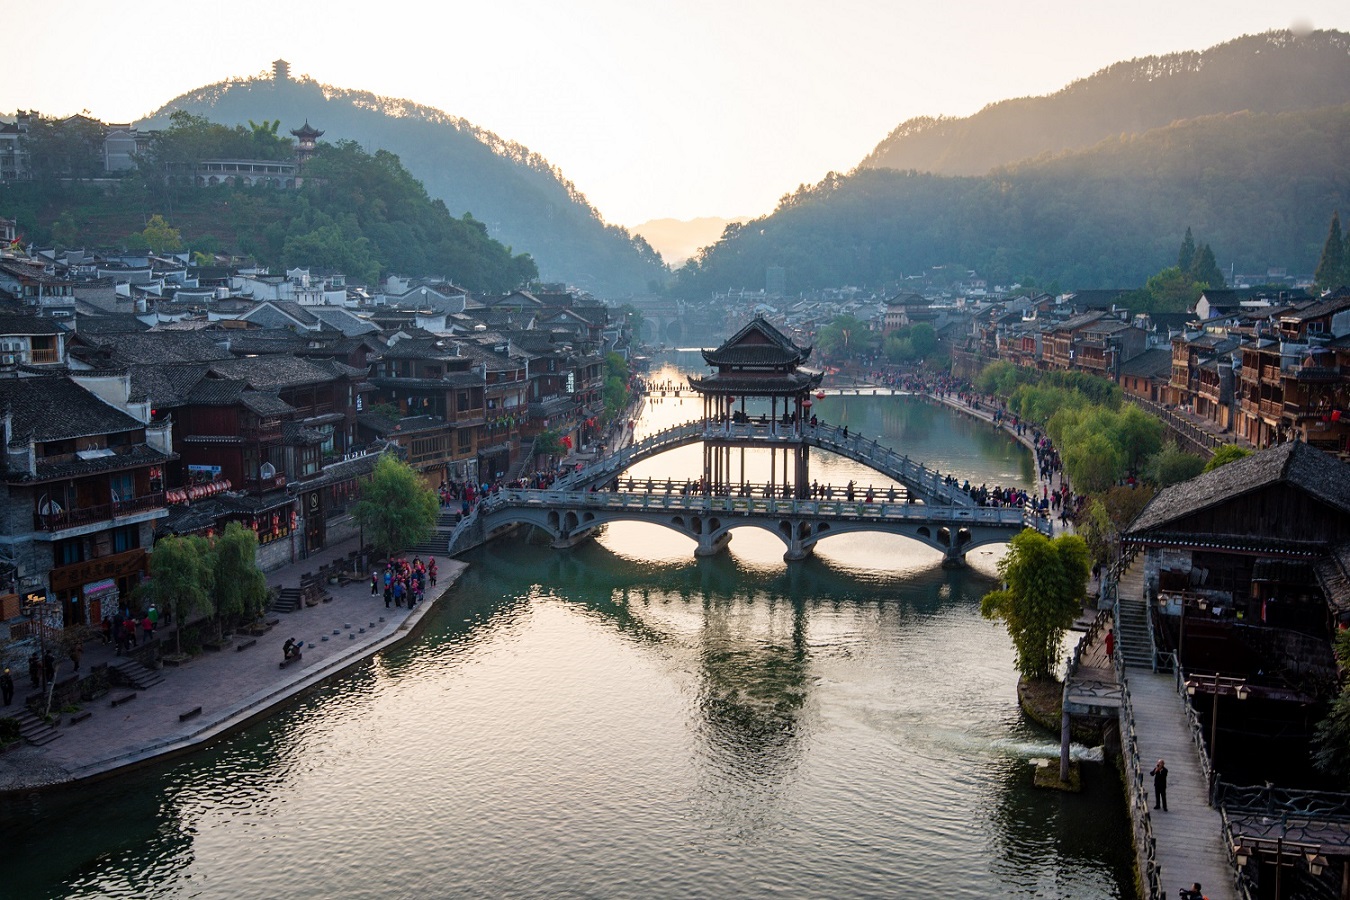 A bridge in Fenghuang City, Province, China.